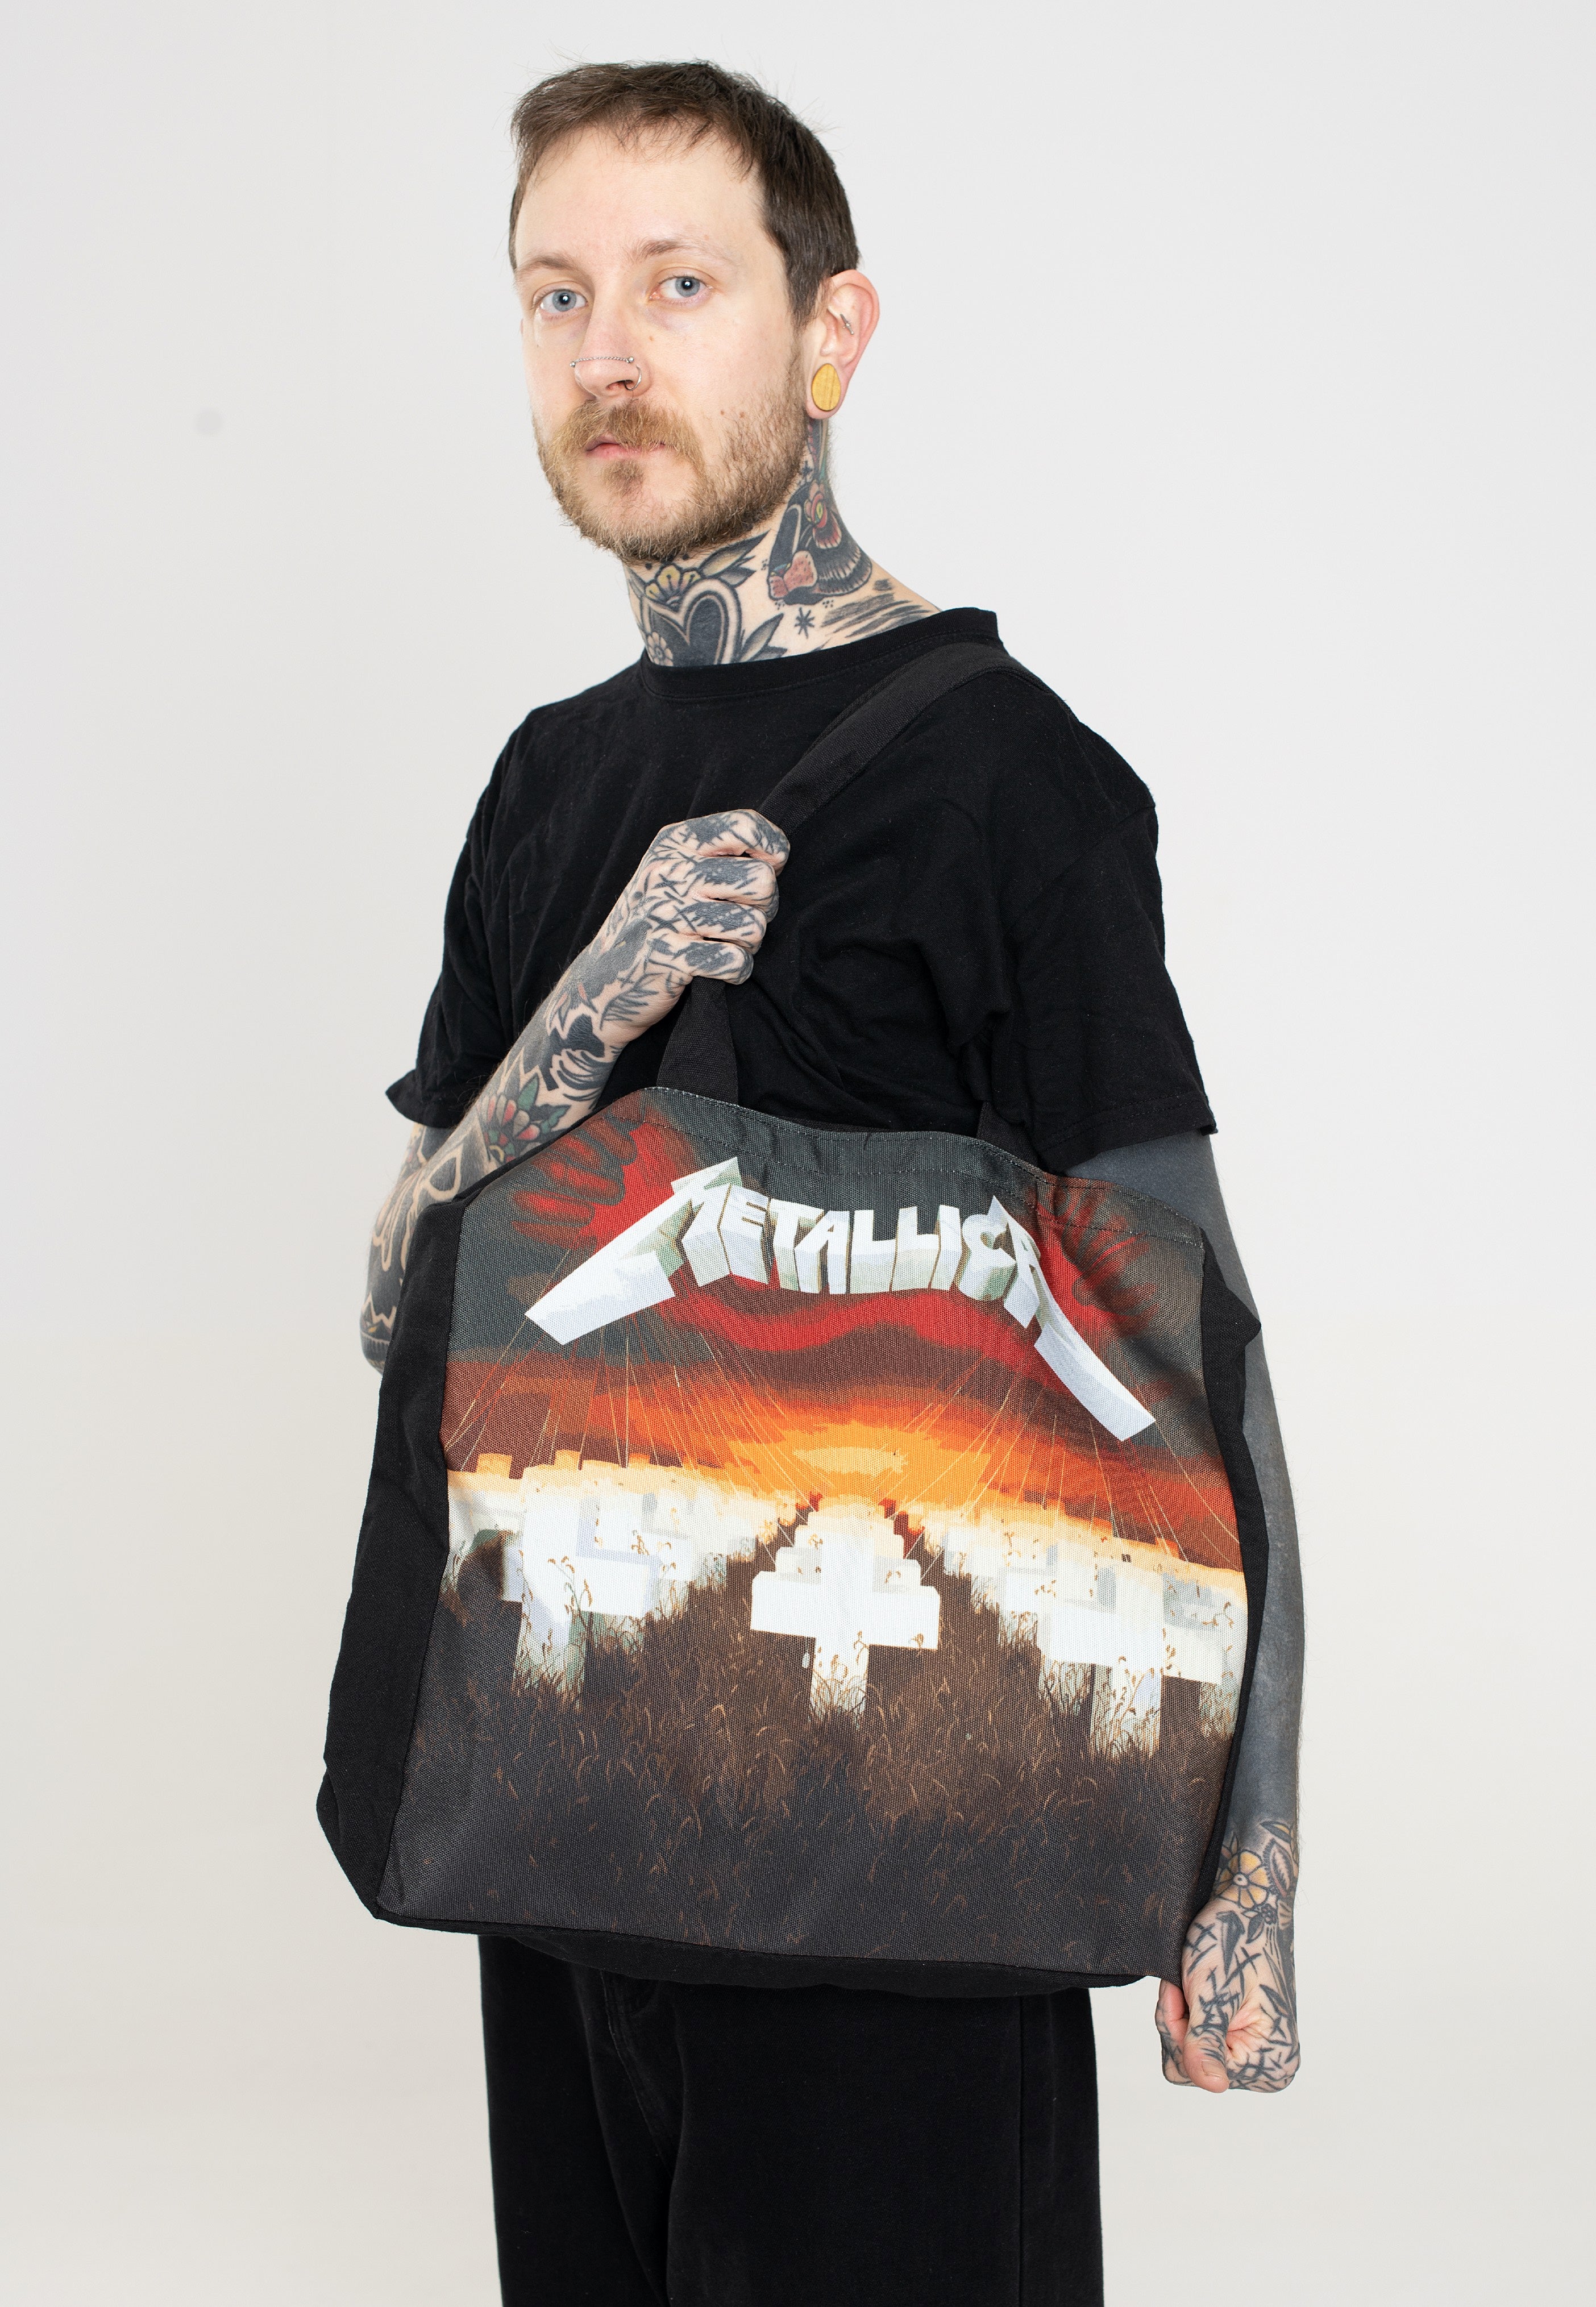 Metallica - Master Of Puppets - Tote Bag